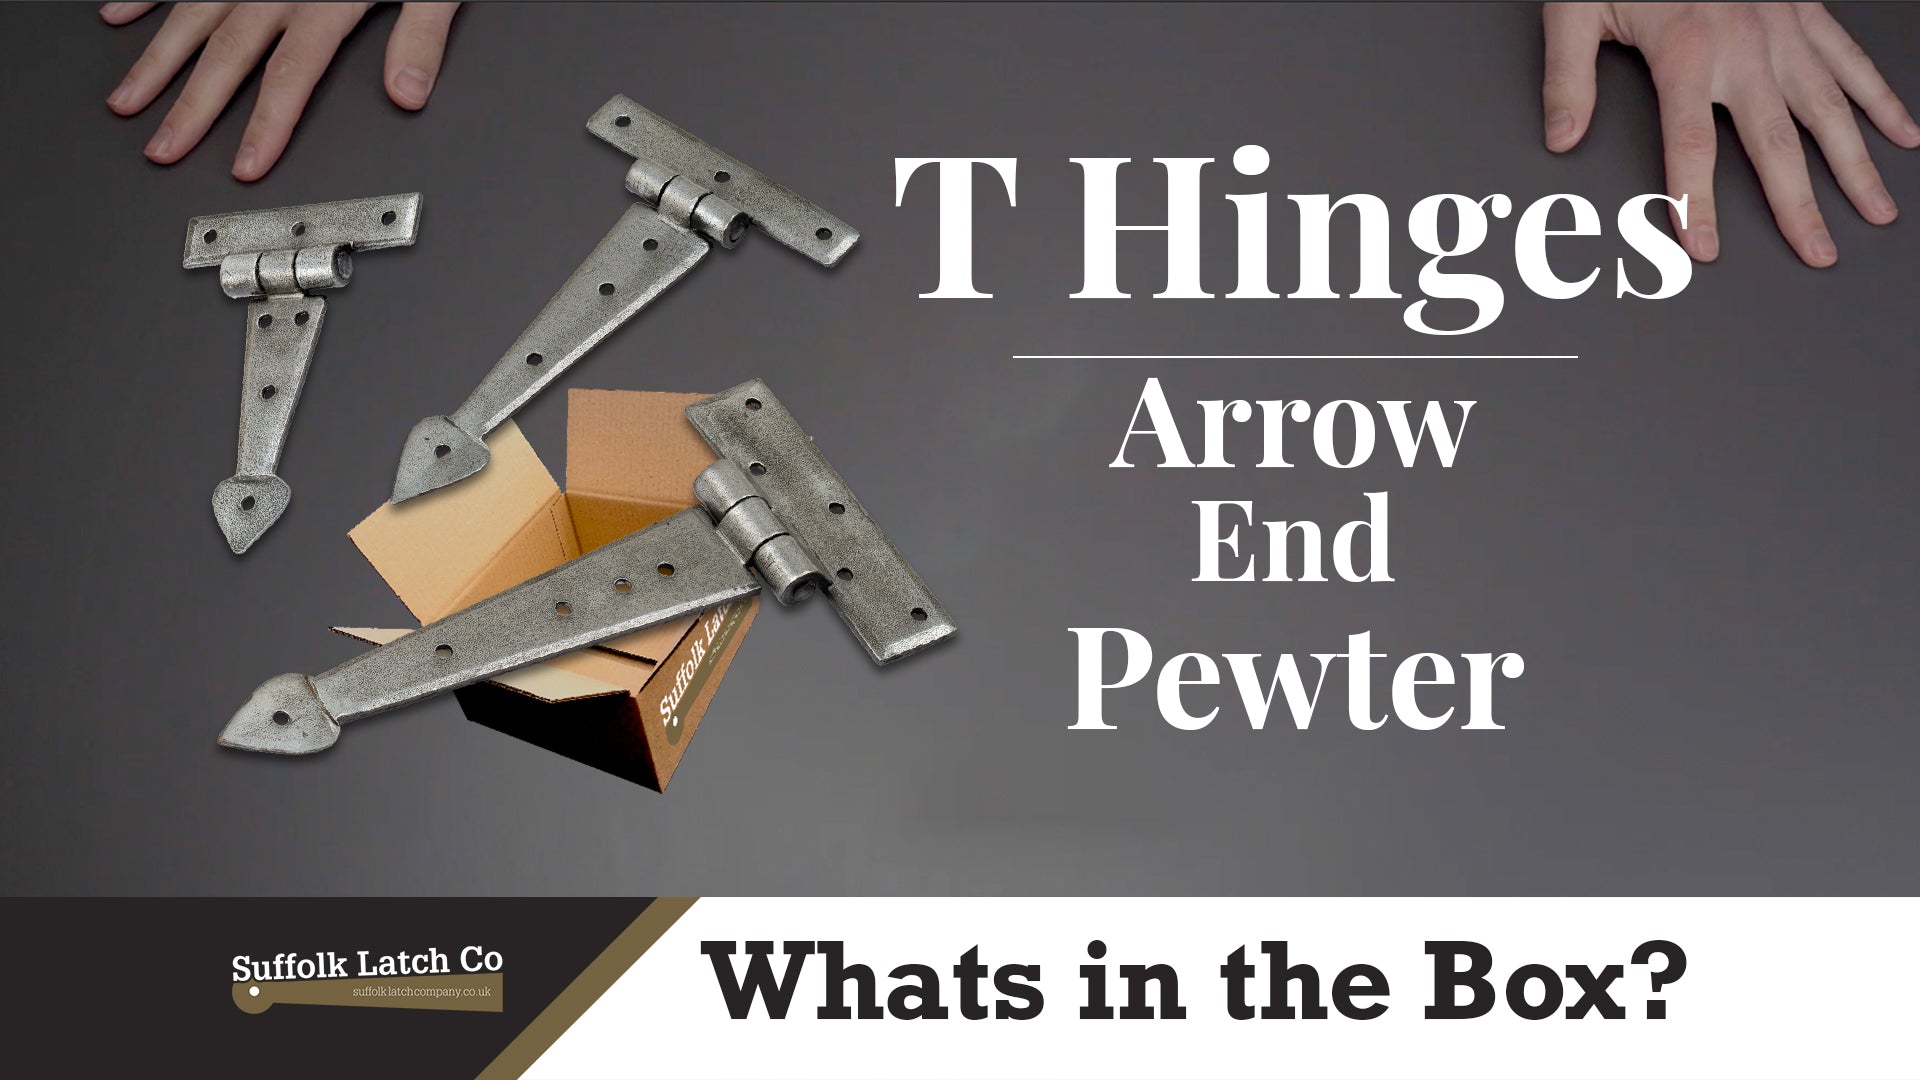 What's In The Box: Arrow End T Hinges in Pewter